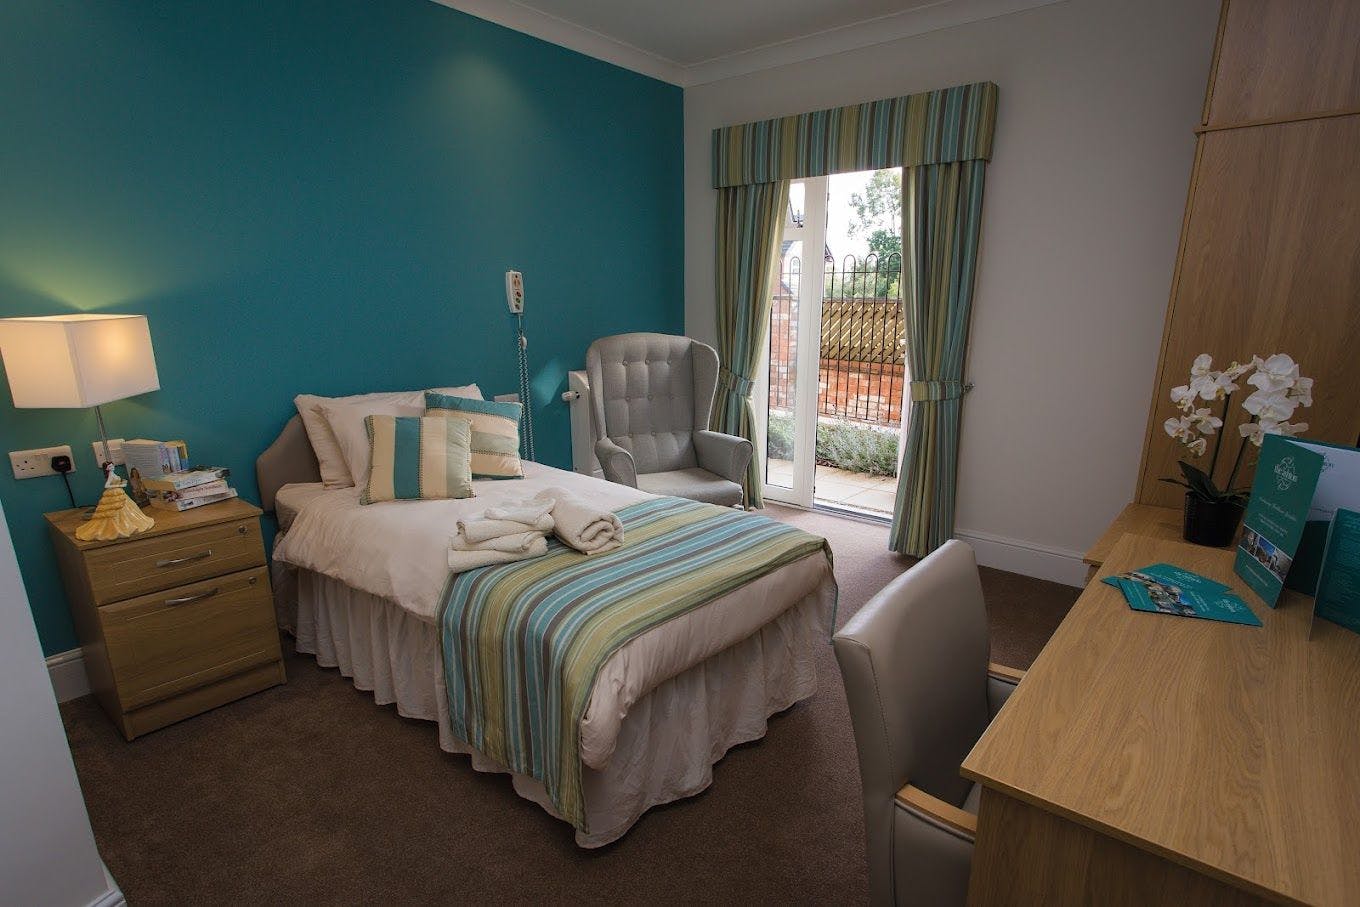 Independent Care Home - The Ashton care home 2